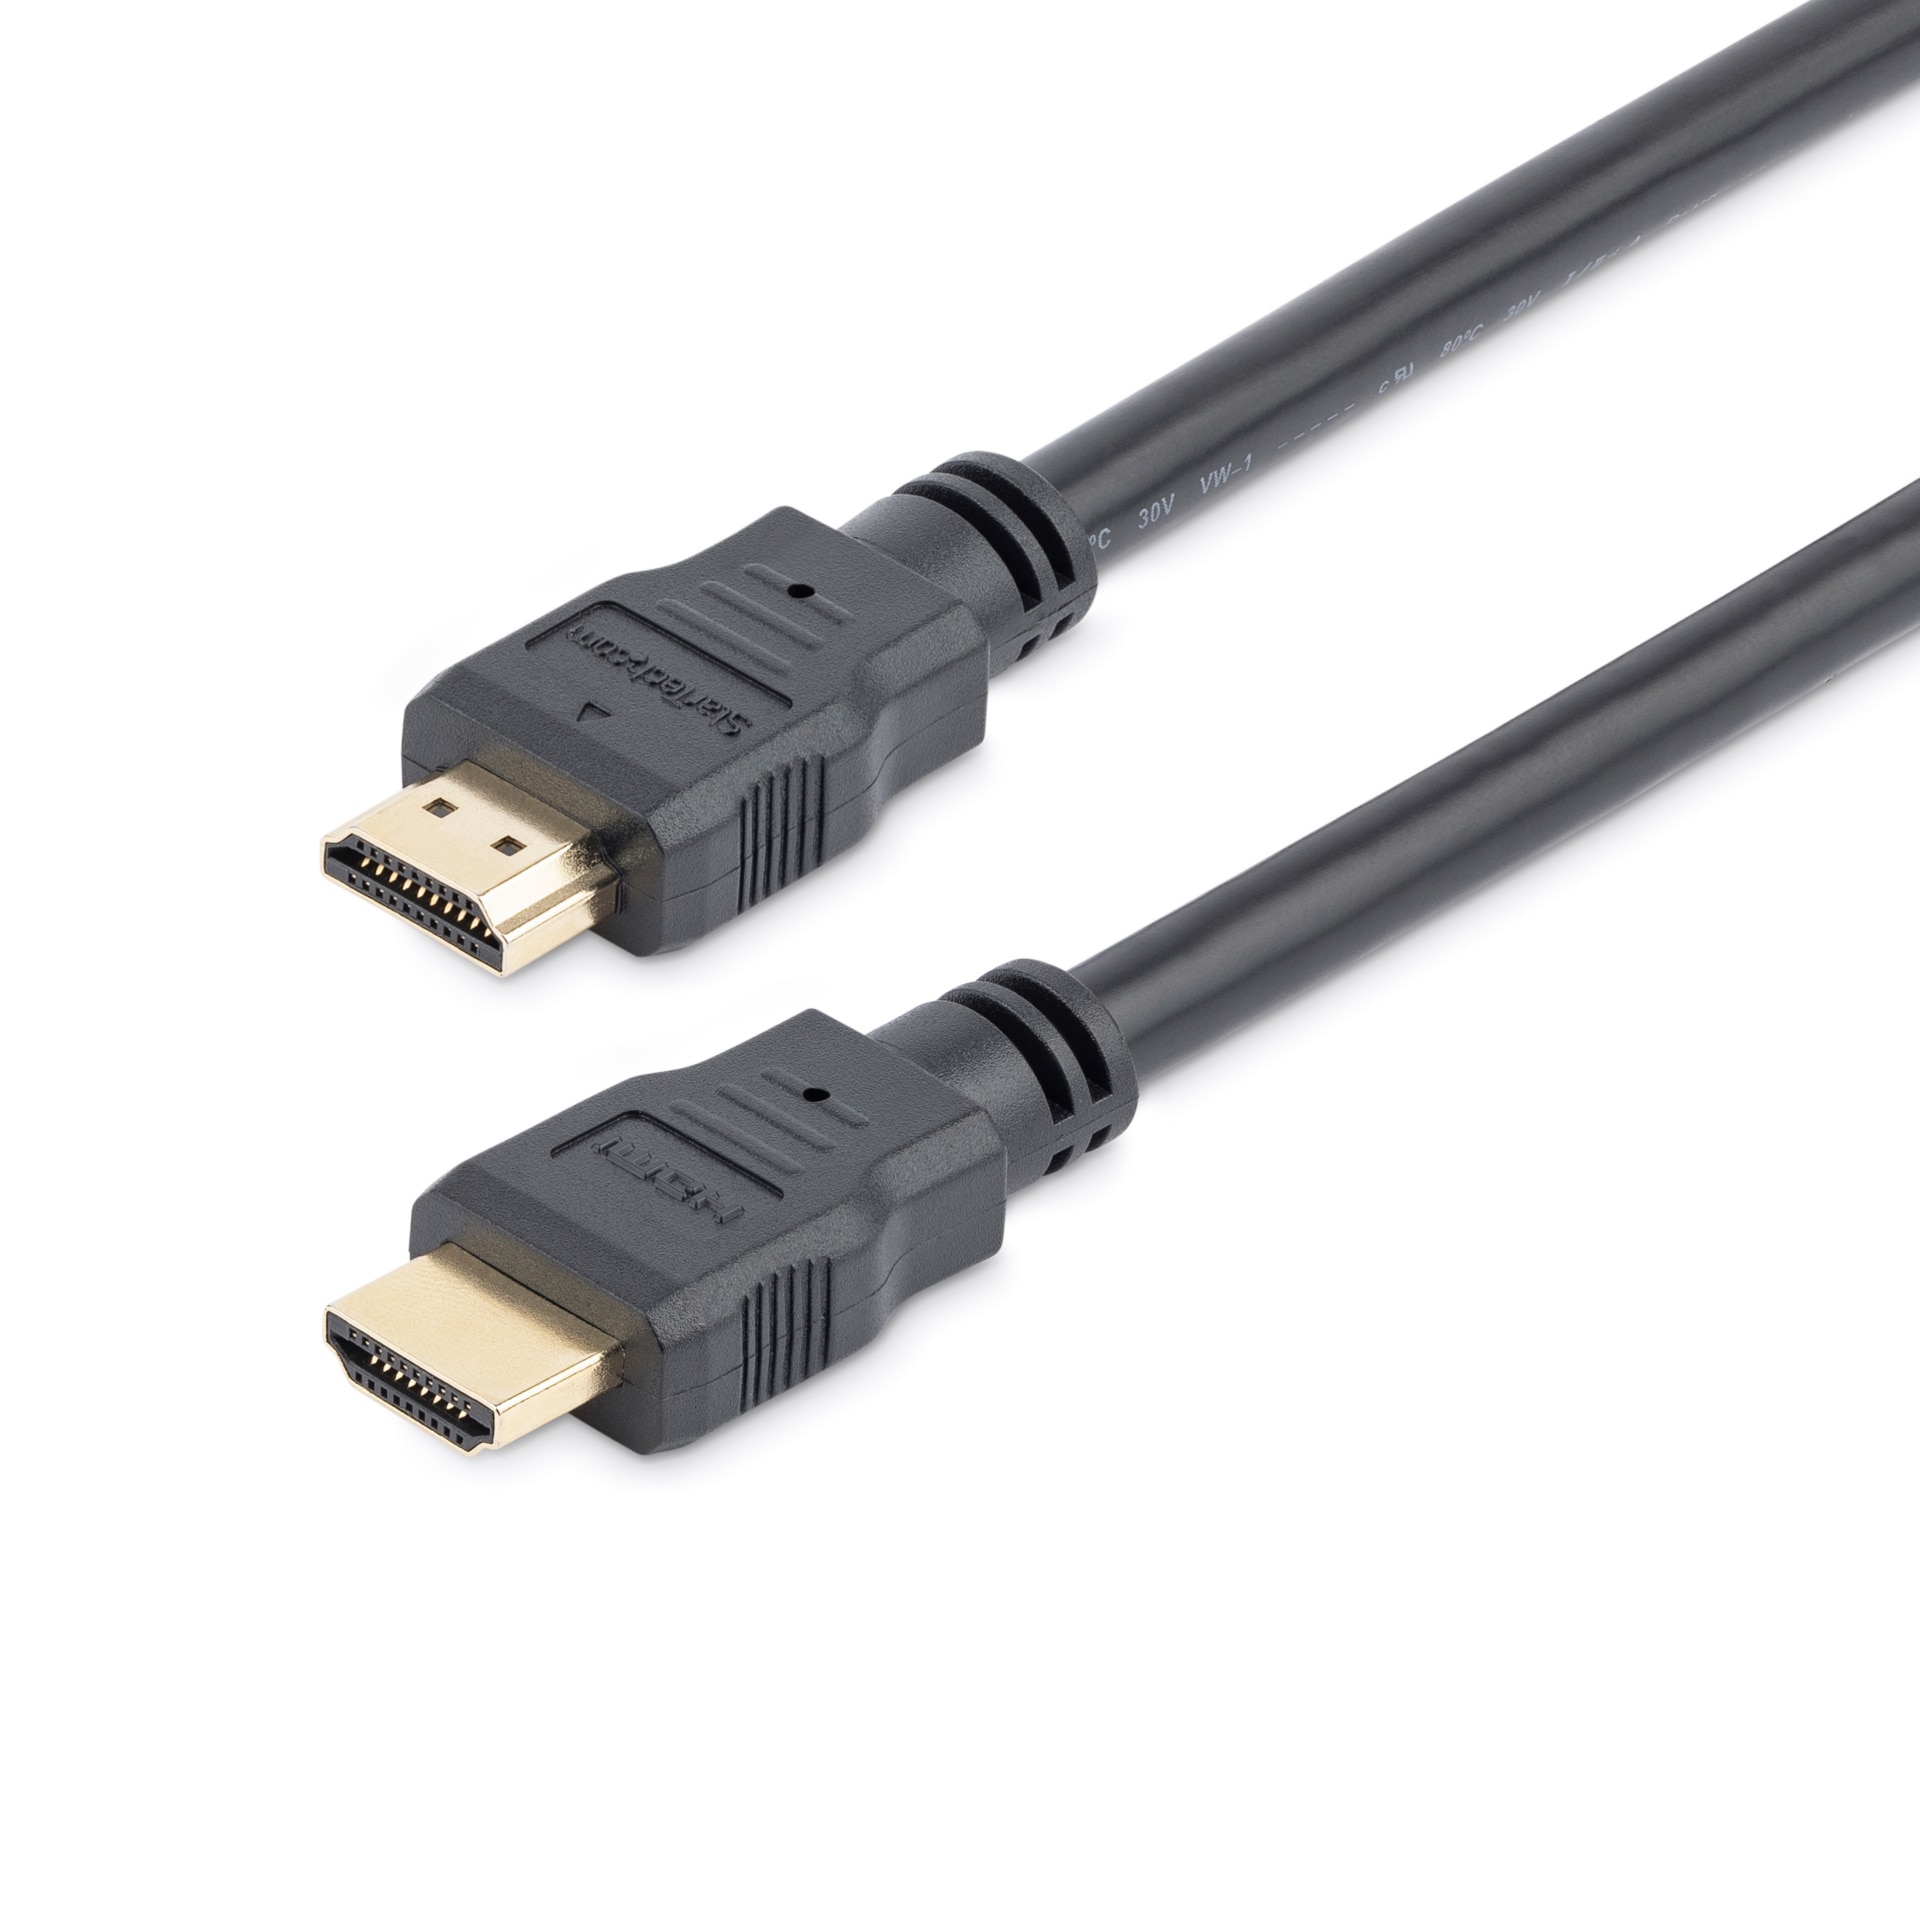 StarTech.com 1ft/30cm HDMI Cable - 4K High Speed HDMI 1.4 Cable w/ Ethernet - UHD HDMI Monitor Cord